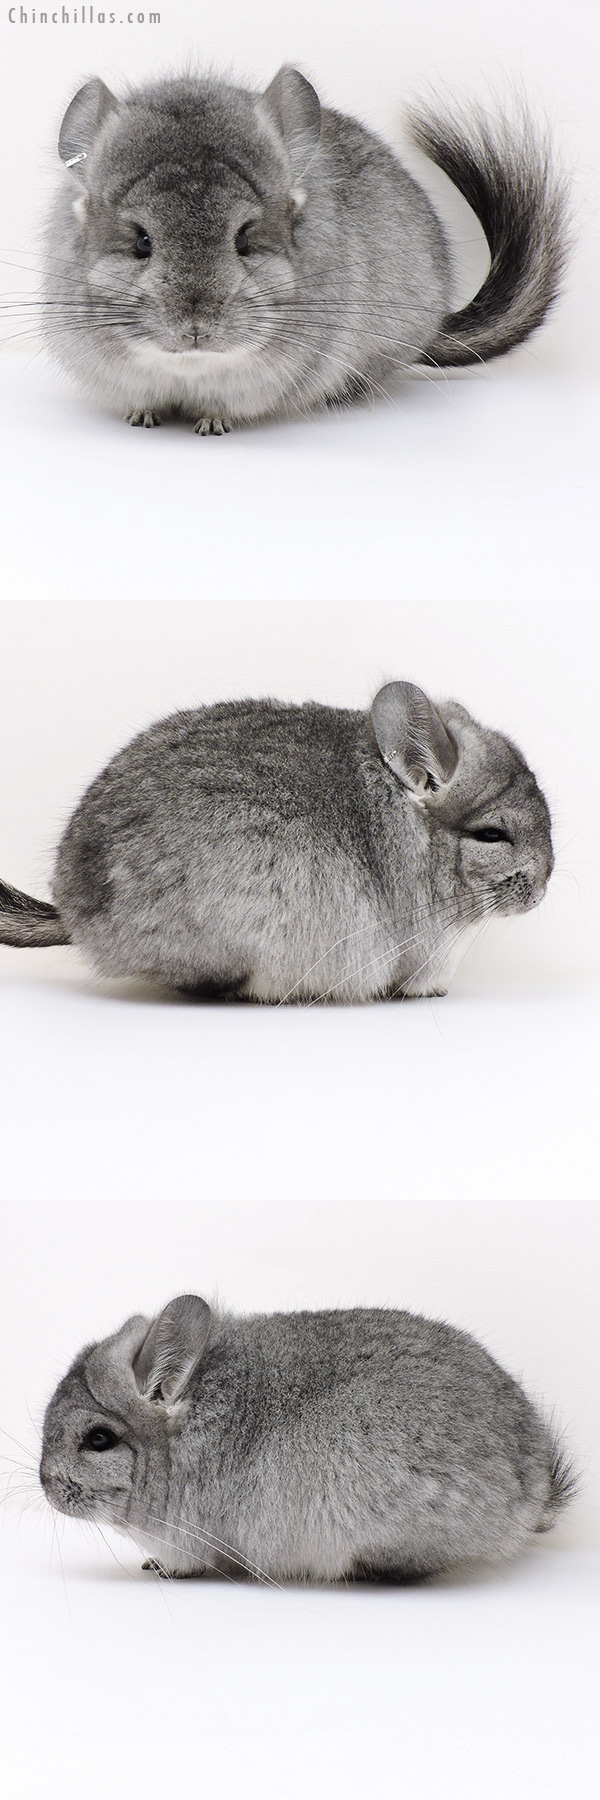 Chinchilla or related item offered for sale or export on Chinchillas.com - 17035 Exceptional Standard  Royal Persian Angora Female Chinchilla with Lion Mane